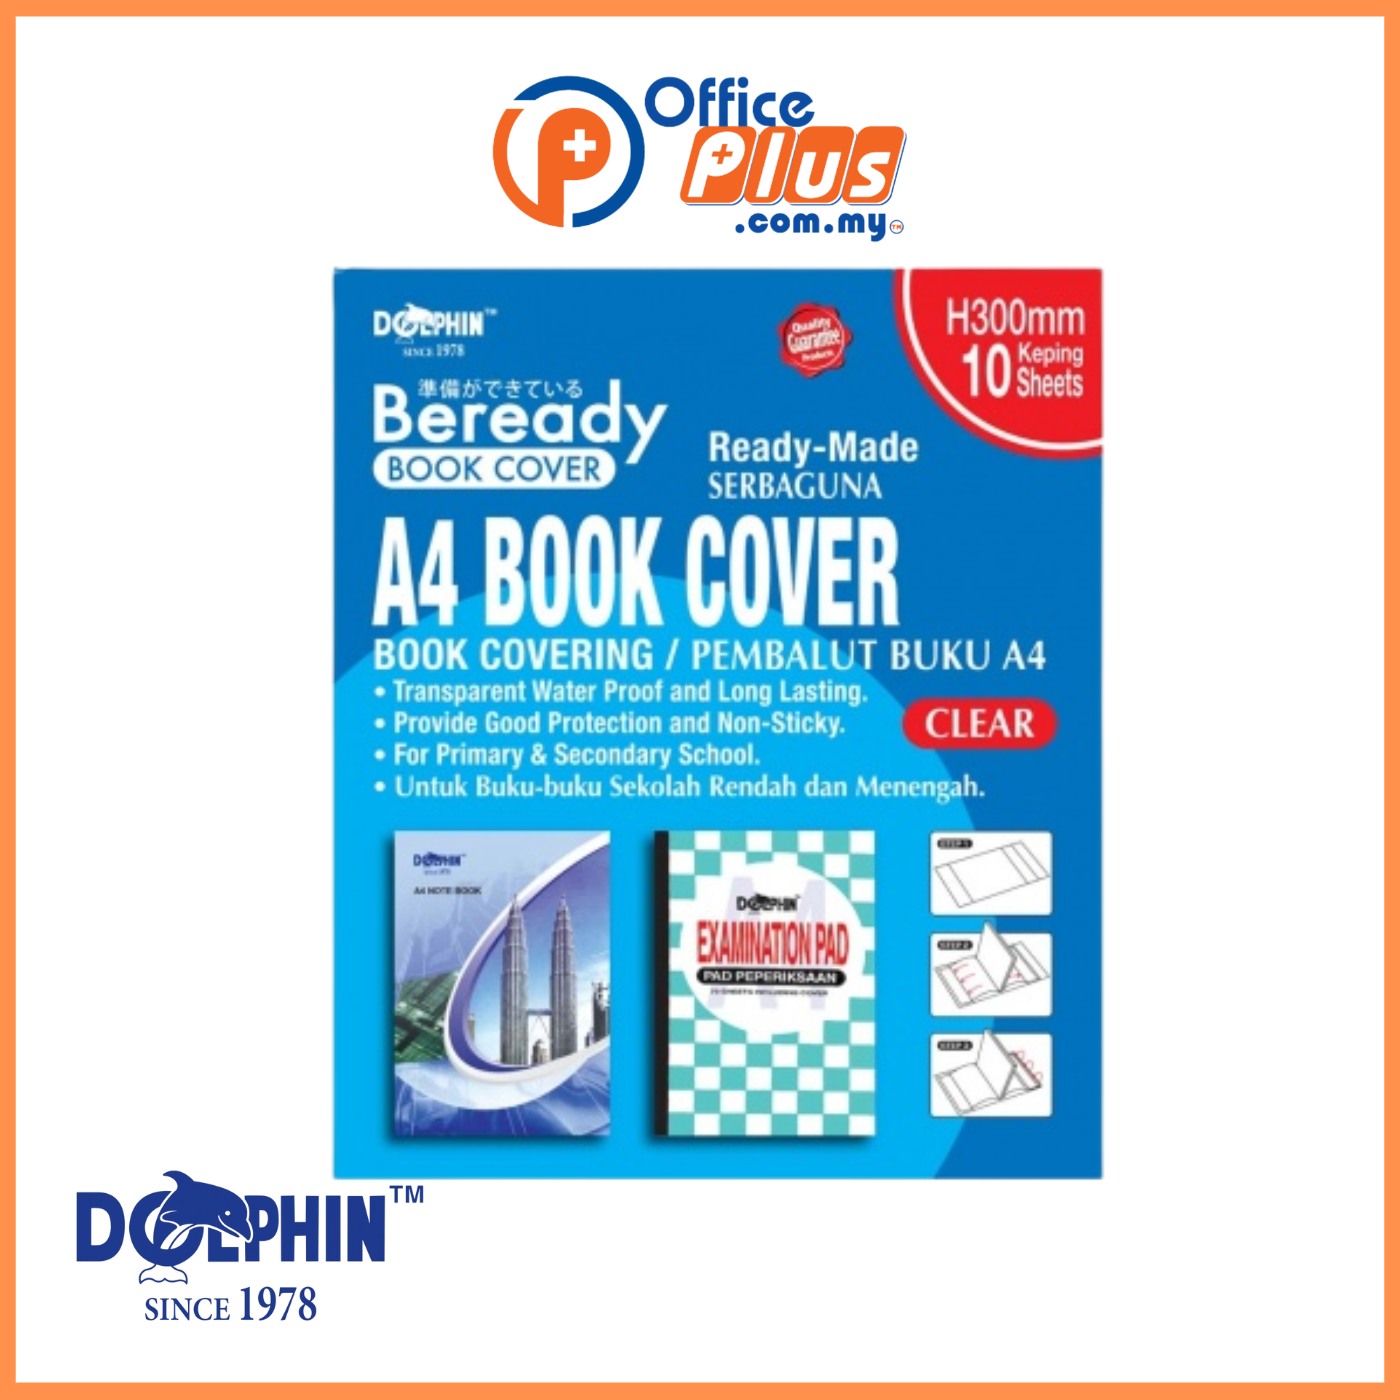 Dolphin Book Cover "Clear" - OfficePlus